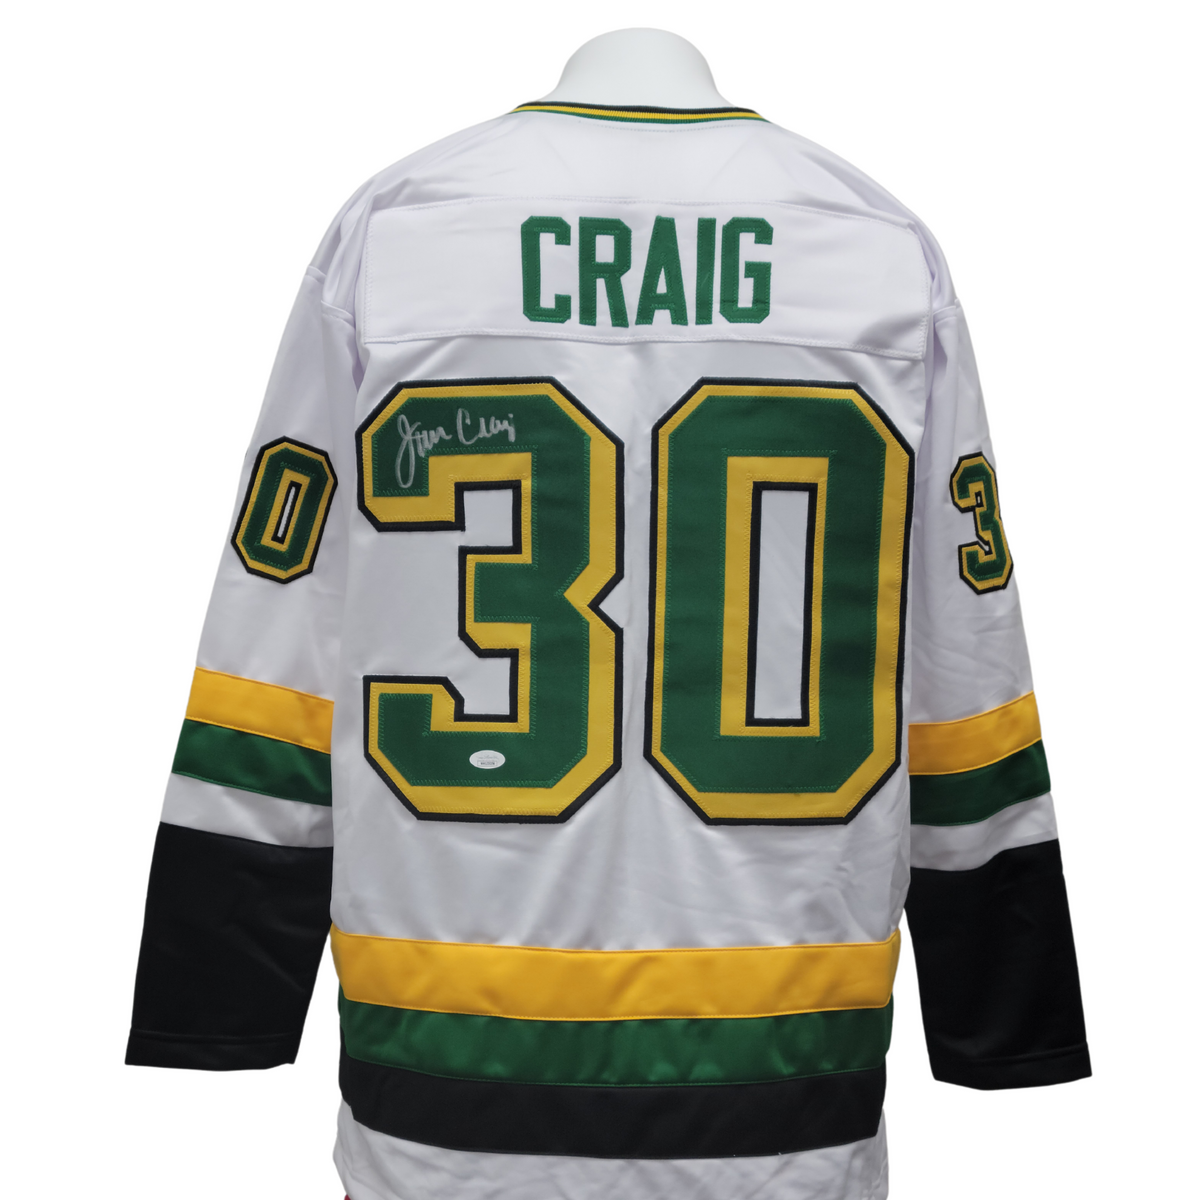 Green and White Hockey Jerseys with the North Stars Twill Logo 